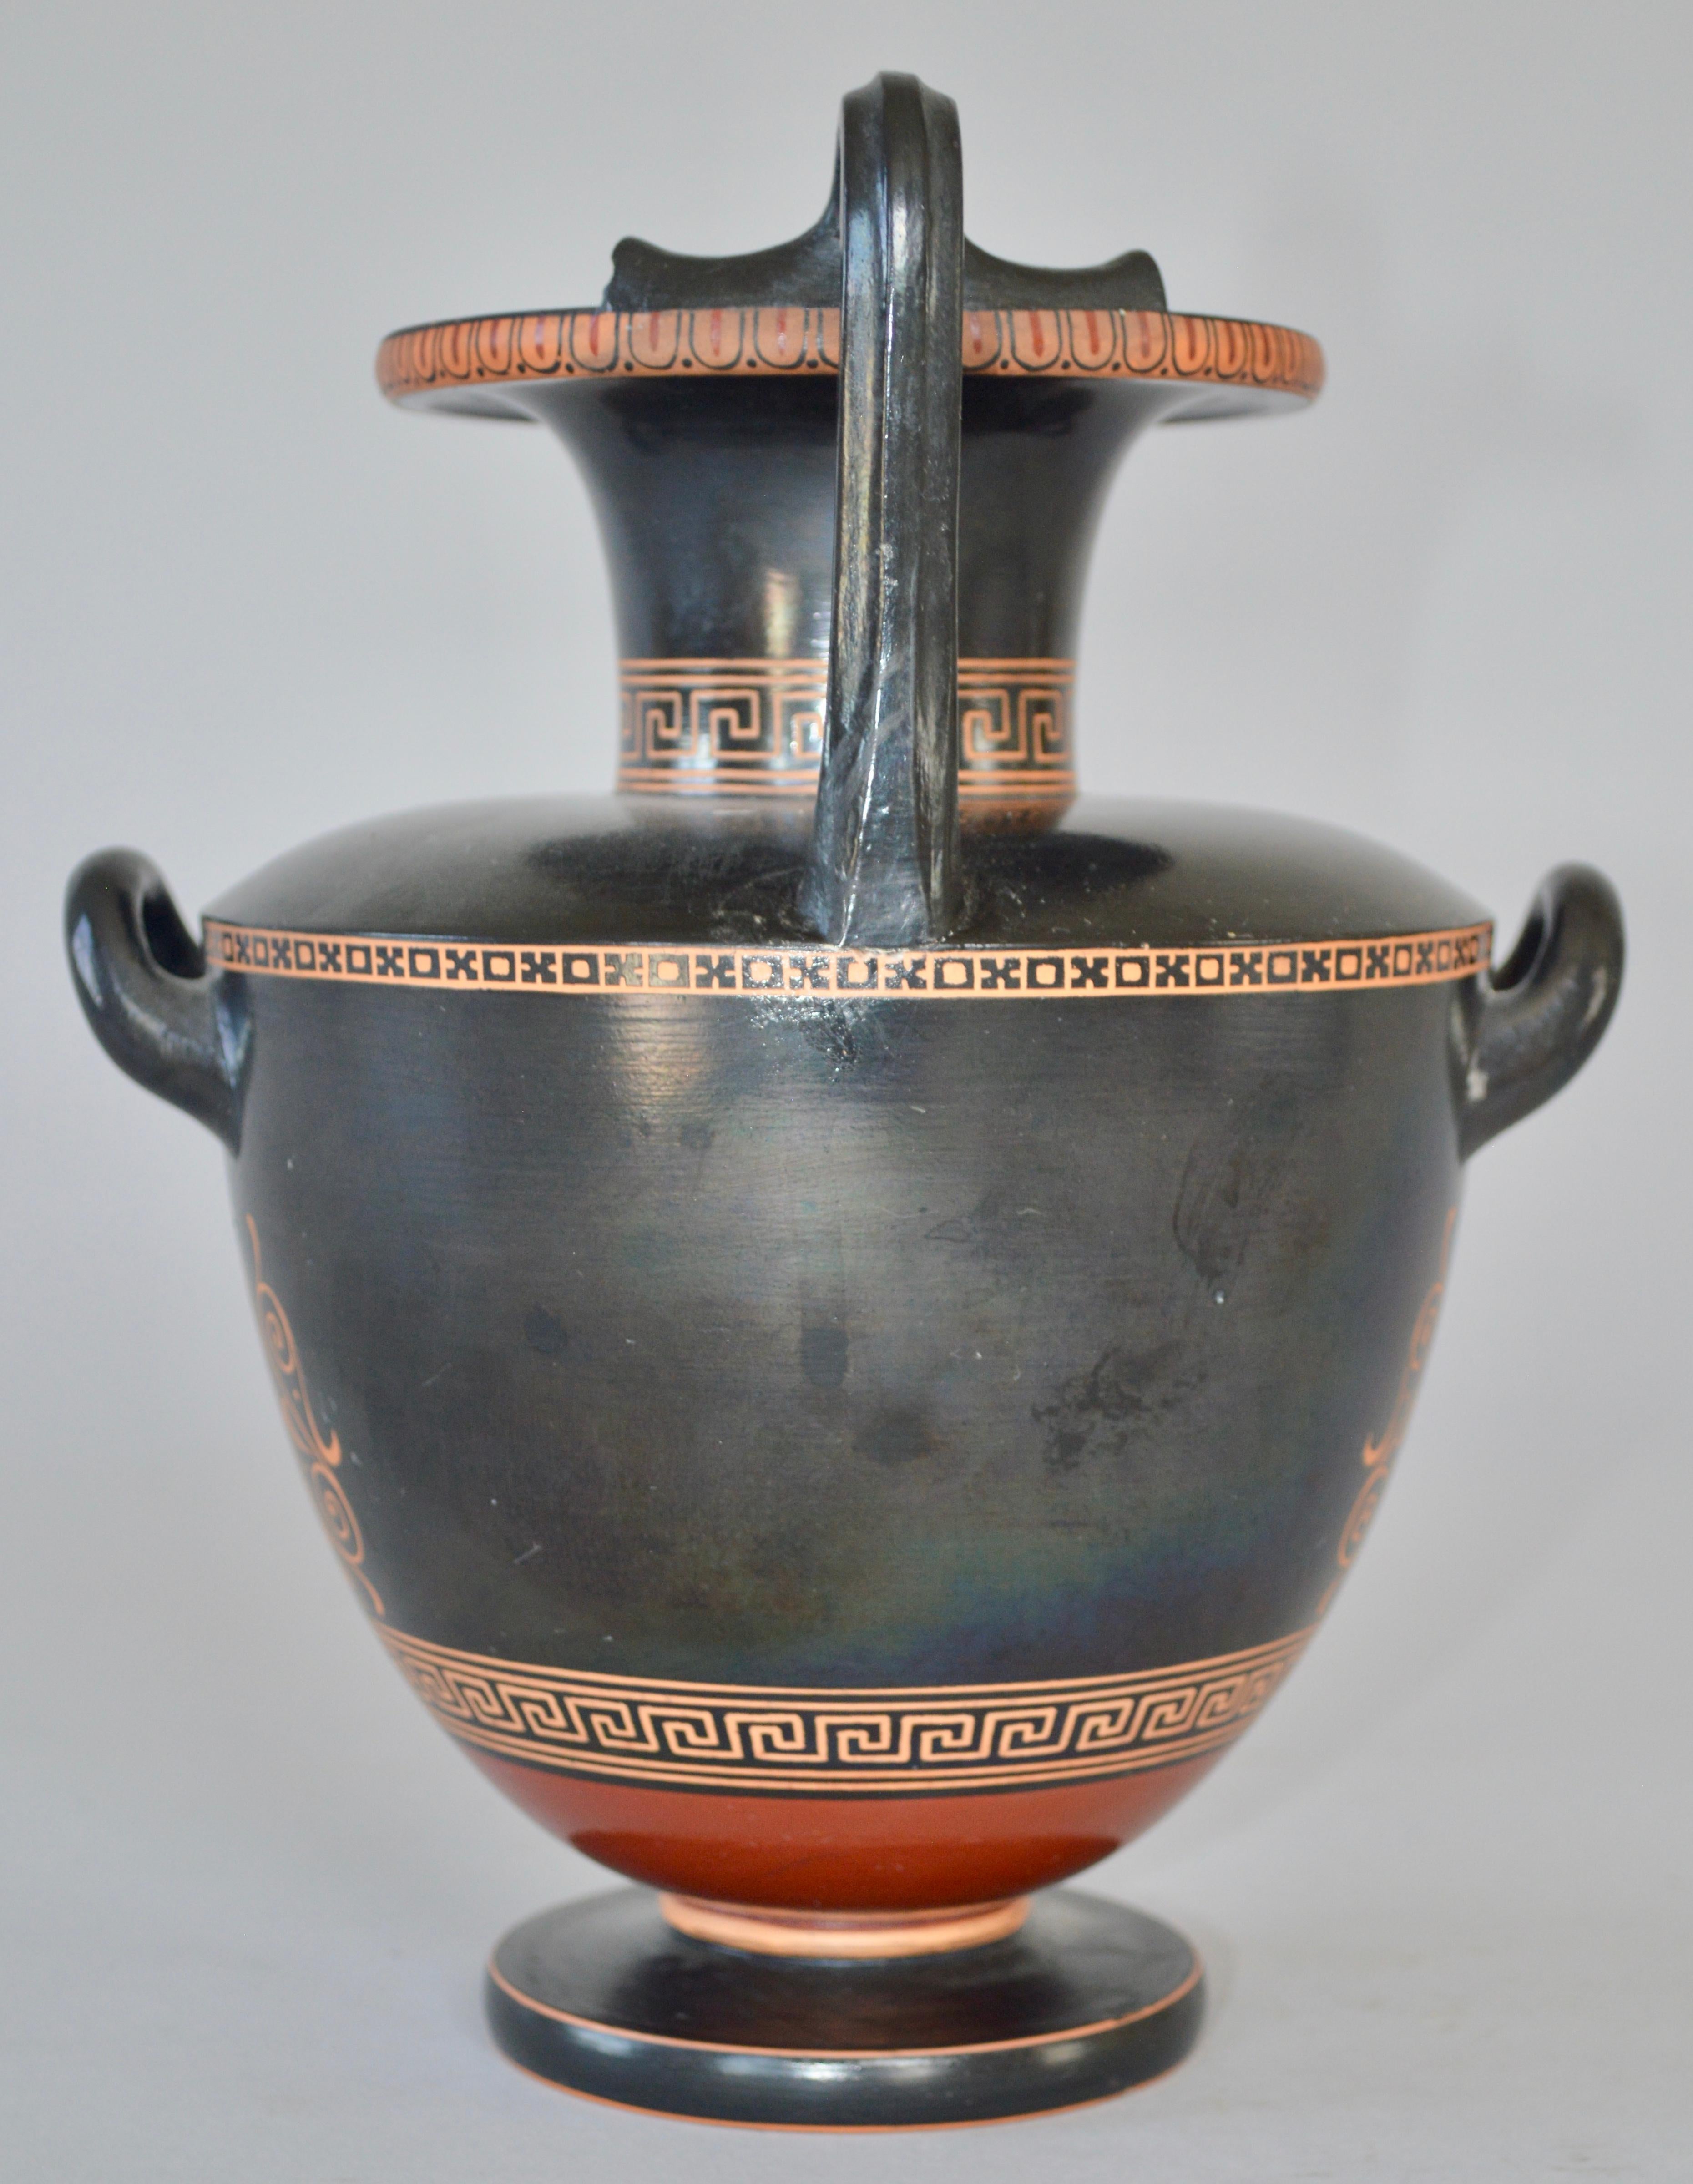 Neoclassical Amphora vase in black painted terracotta, decorated with figures and symbols from Greek mythology. Extremely high artcraft quality. Signed and stamped P. Ibsen eneret Copenhagen 27/311 Denmark, 1870-1890.